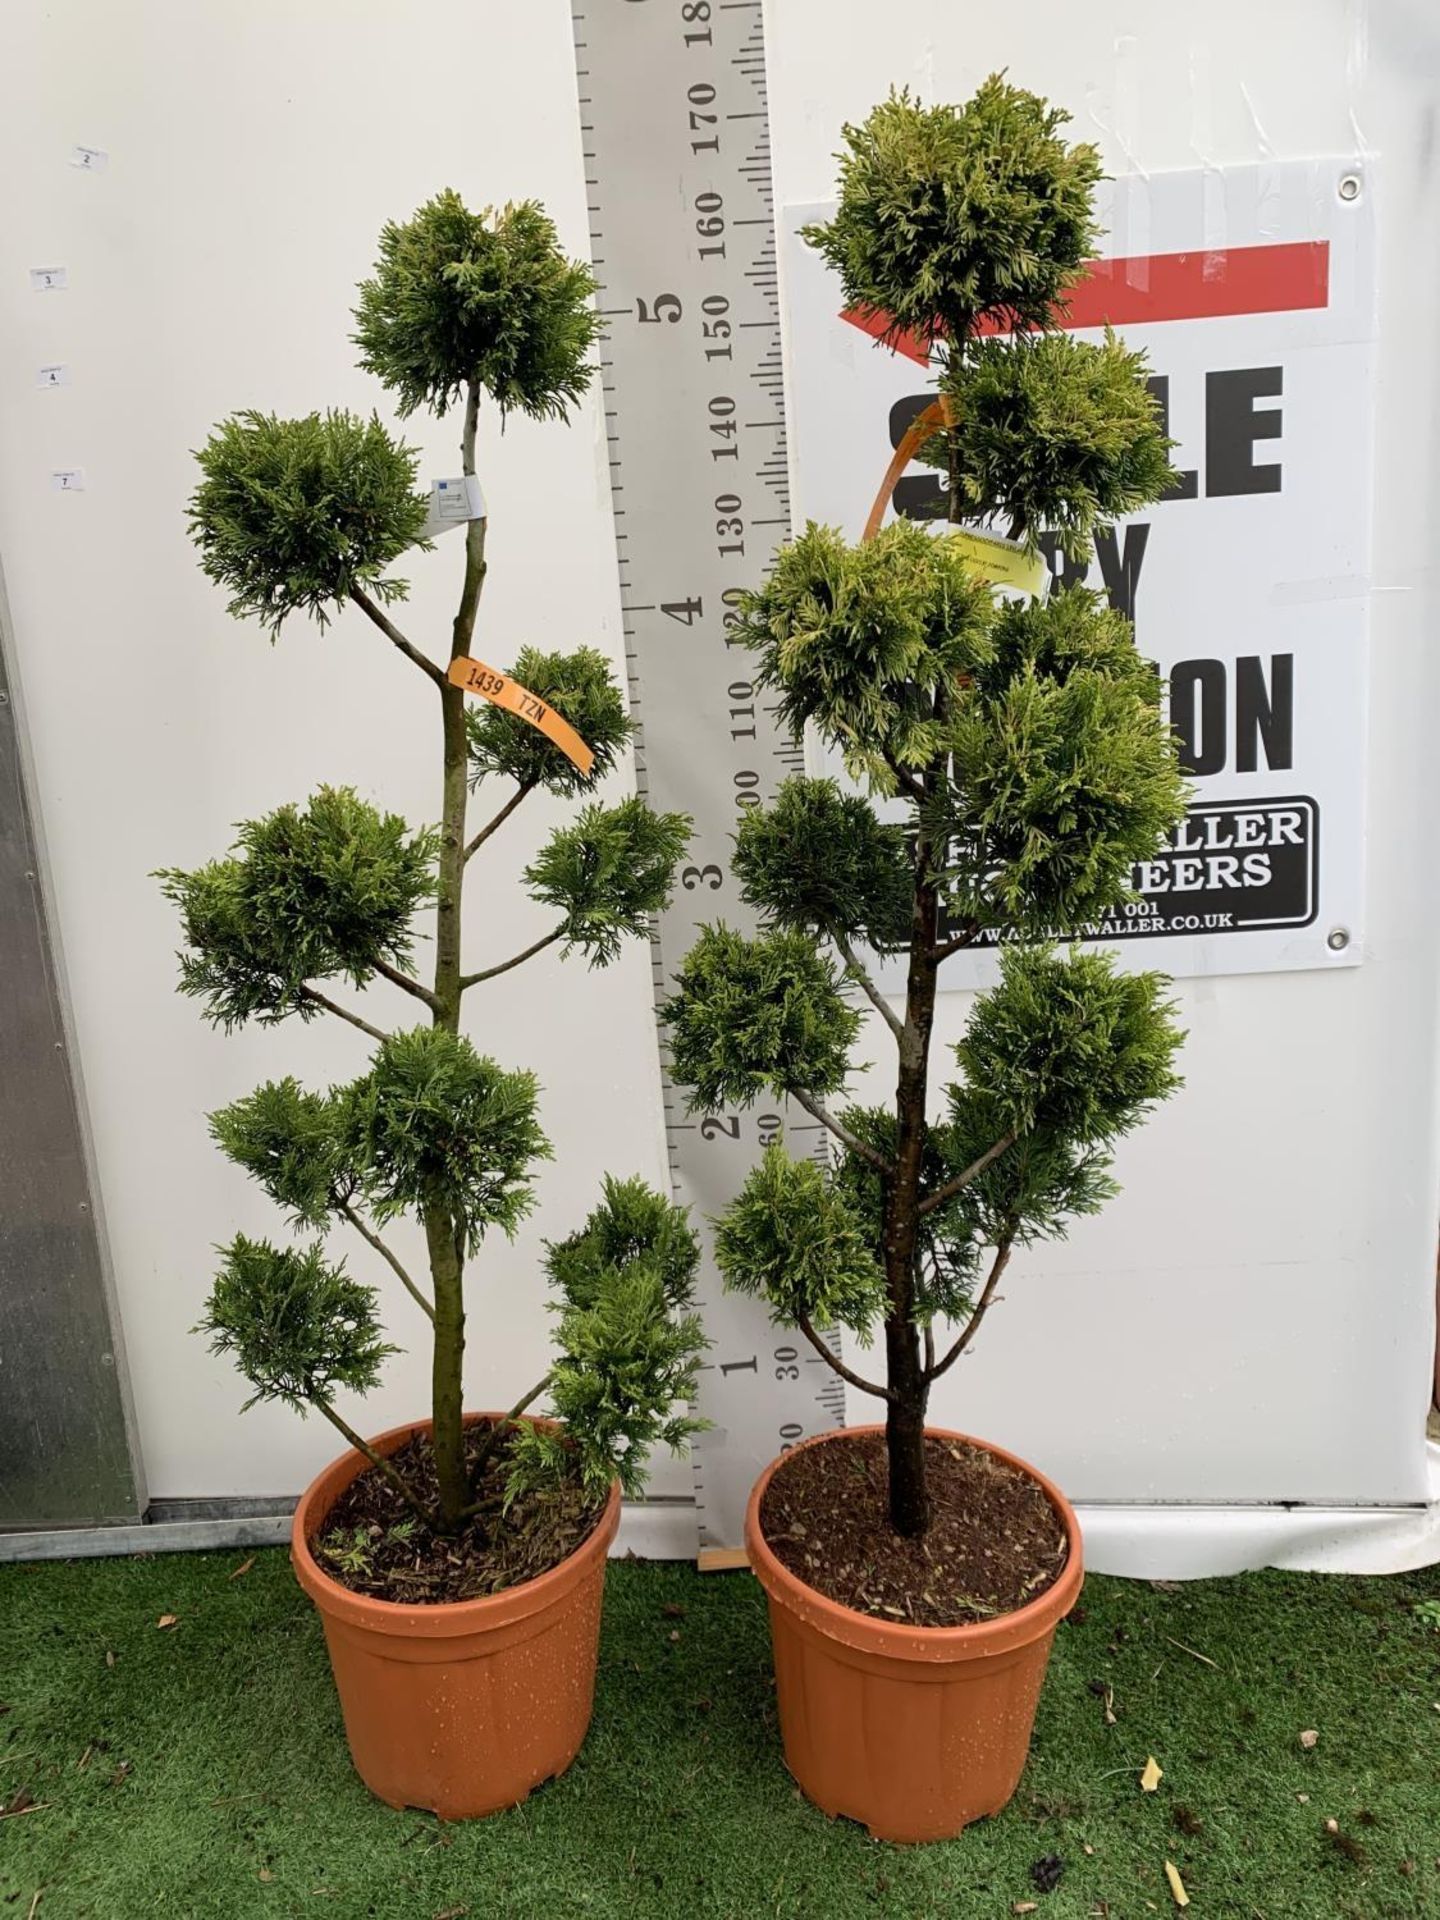 TWO POM POM TREES CUPRESSOCYPARIS LEYLANDII 'GOLD RIDER' APPROX 160CM IN HEIGHT IN 15 LTR POTS - Image 2 of 10